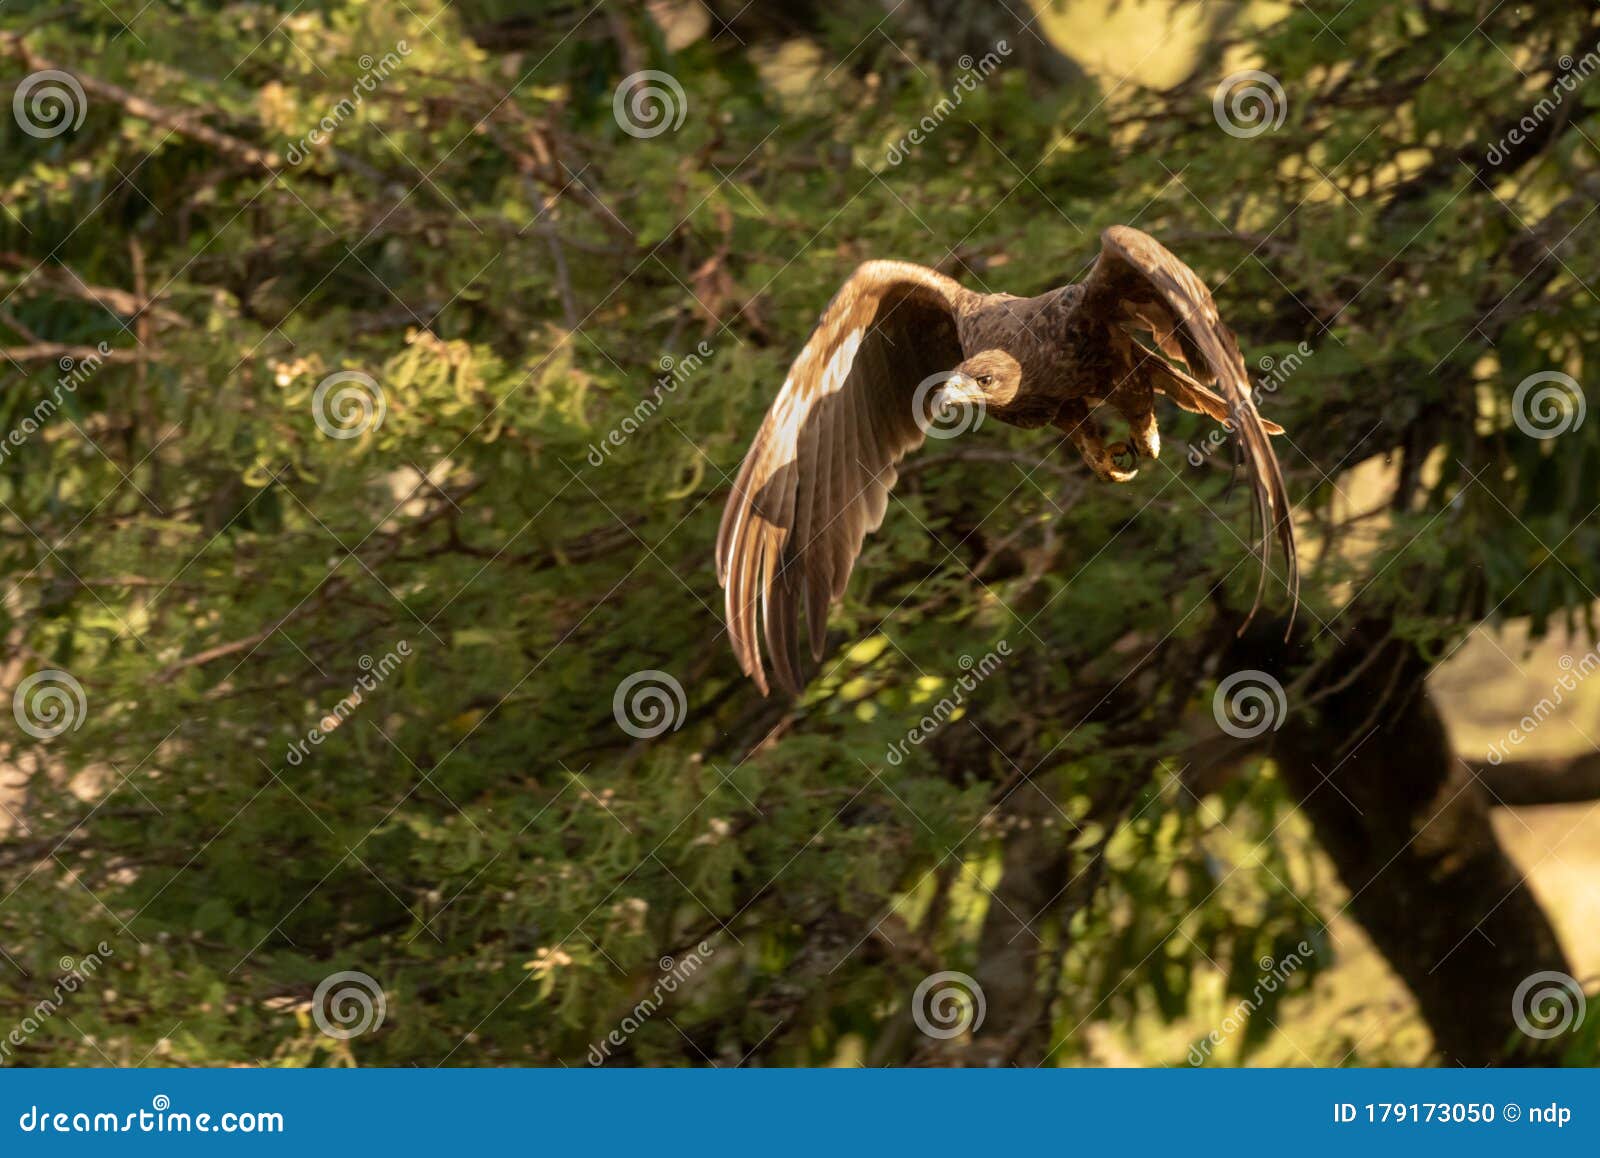 steppe eagle with catchlight flying from tree